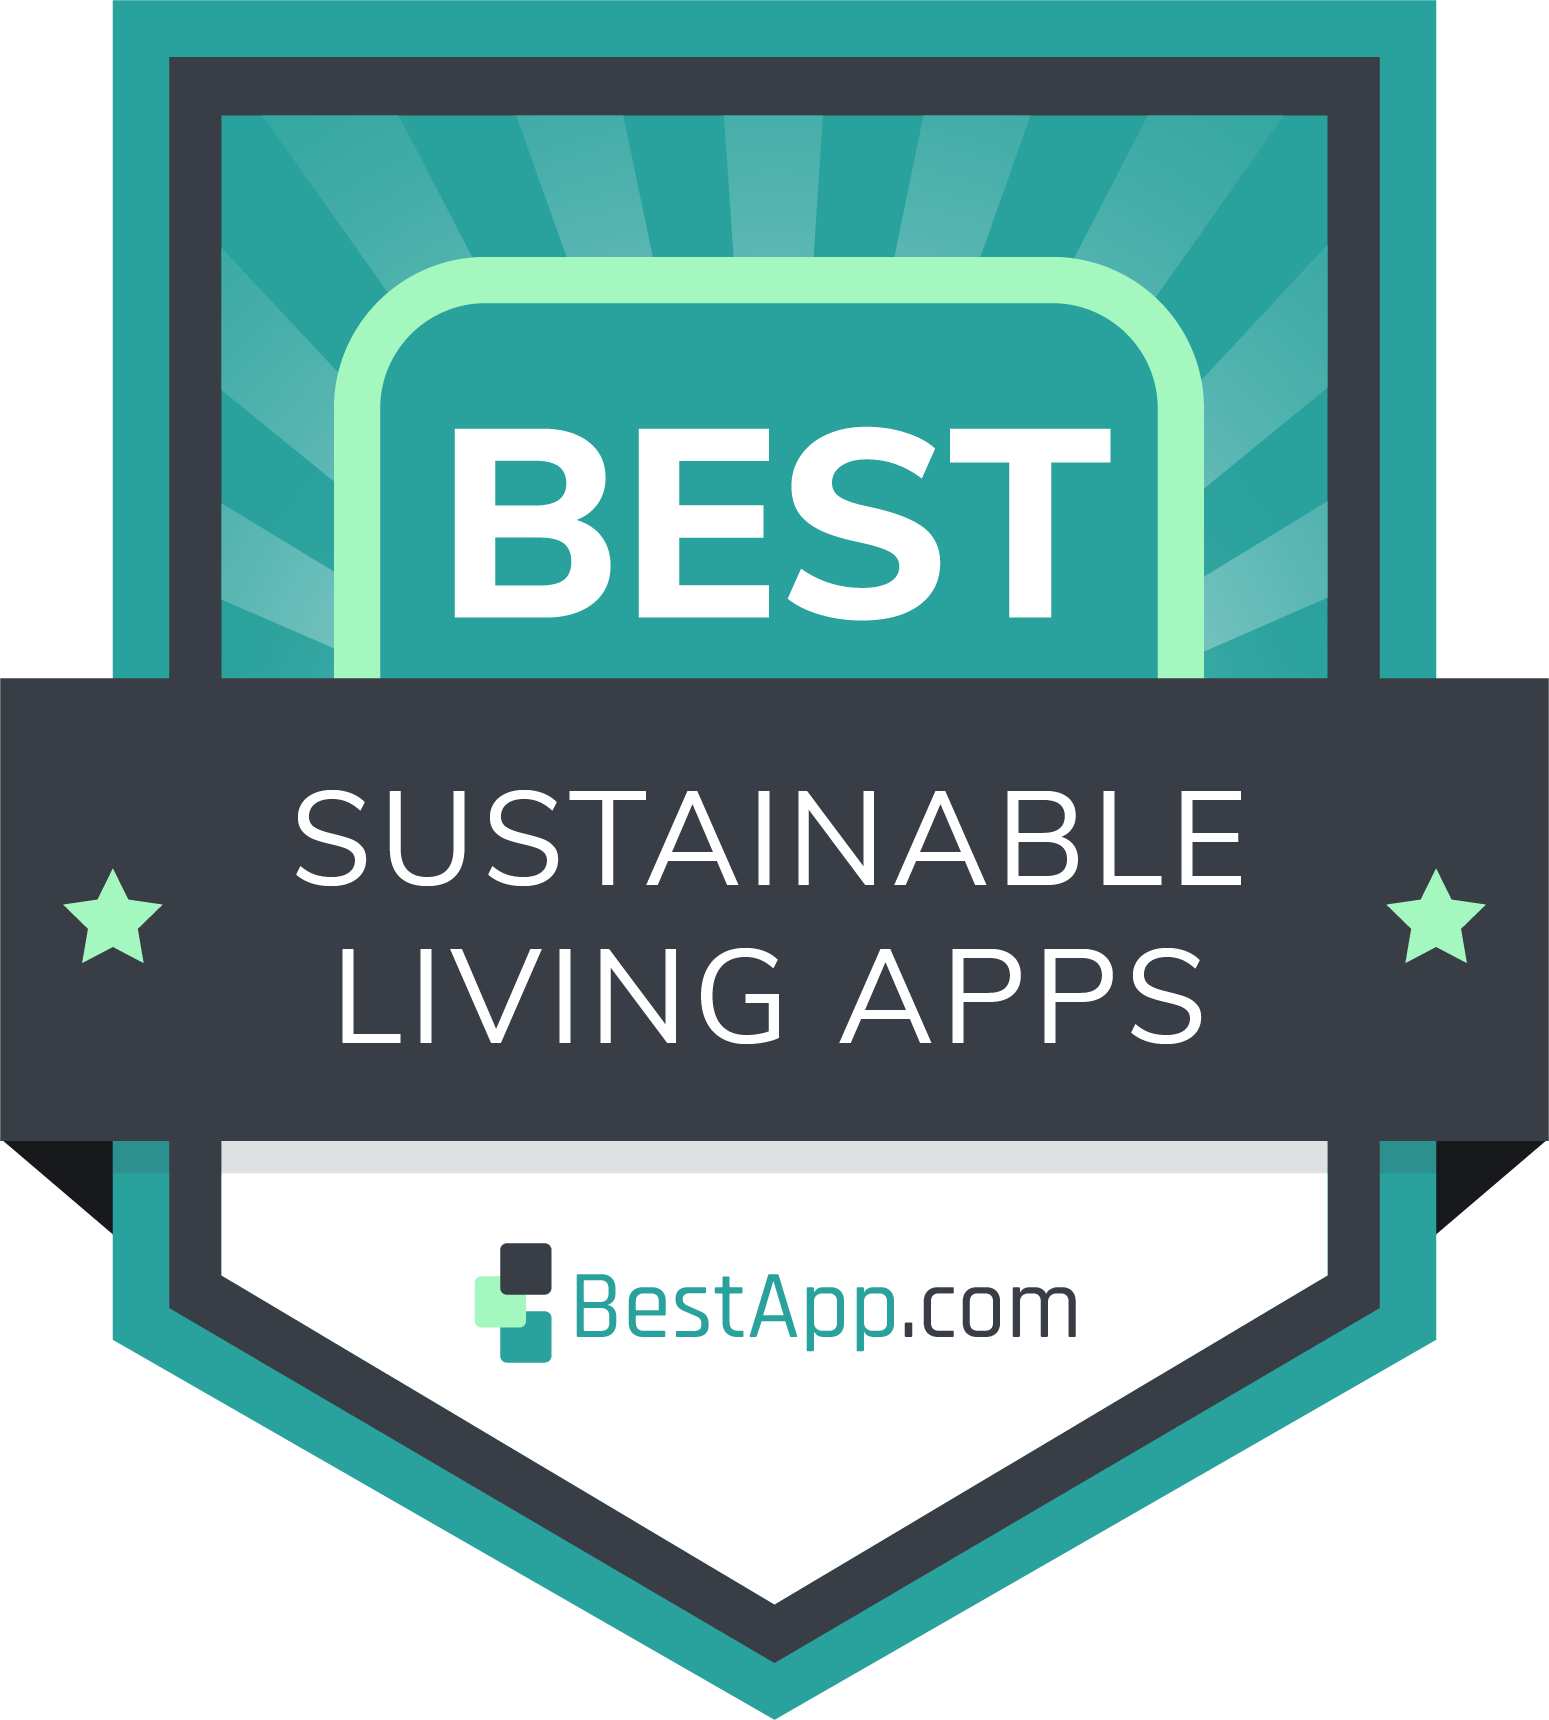 Best Sustainable Living Apps Badge